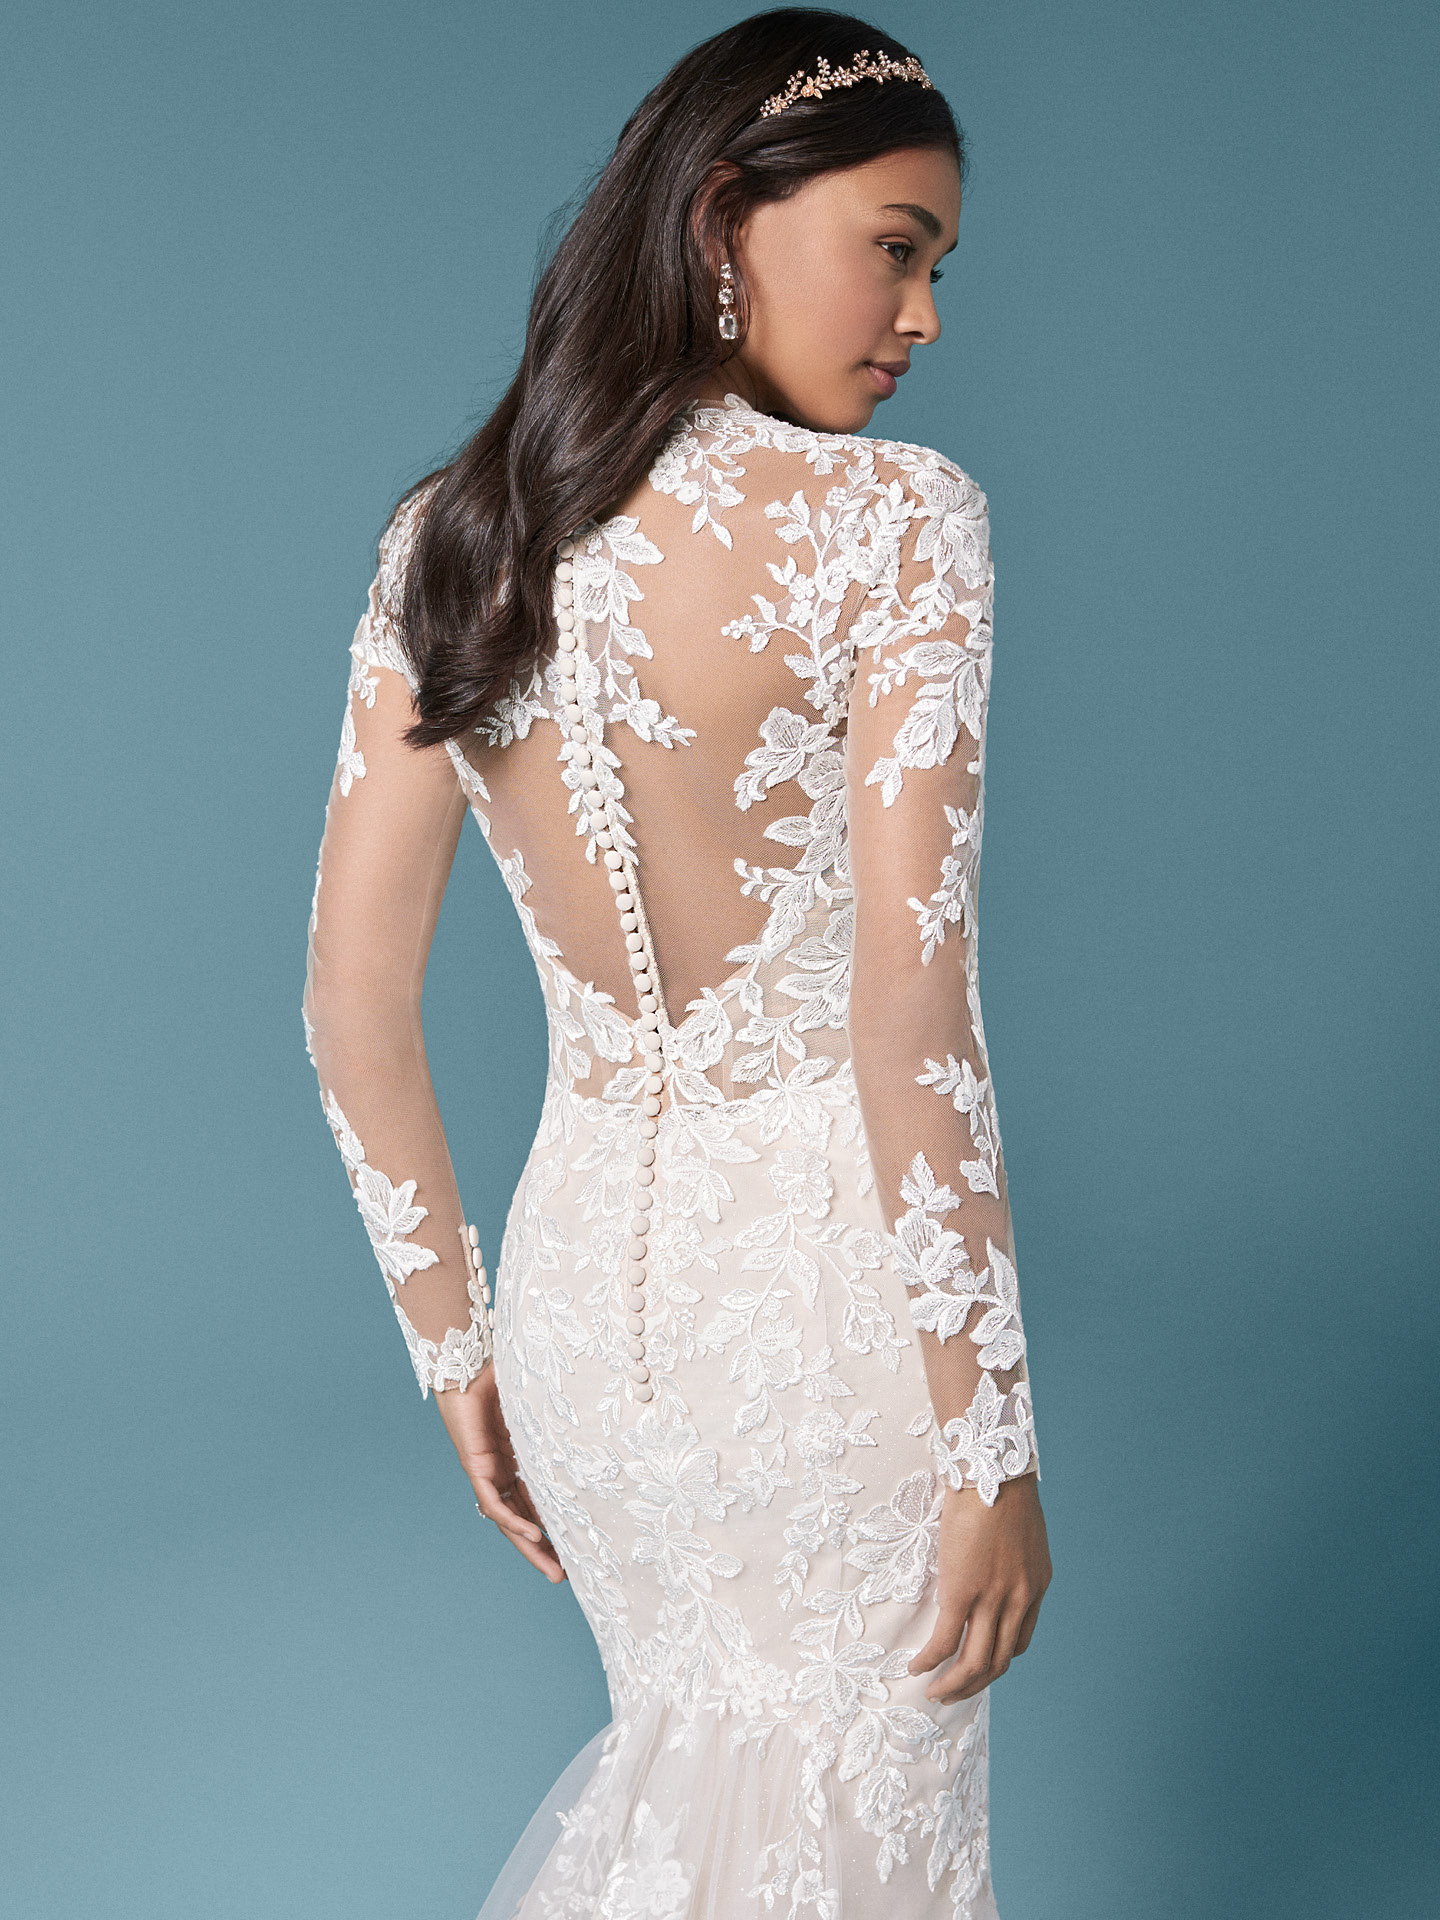 Model Wearing Illusion Lace Sleeve Sheath Bridal Gown Called Francesca by Maggie Sottero